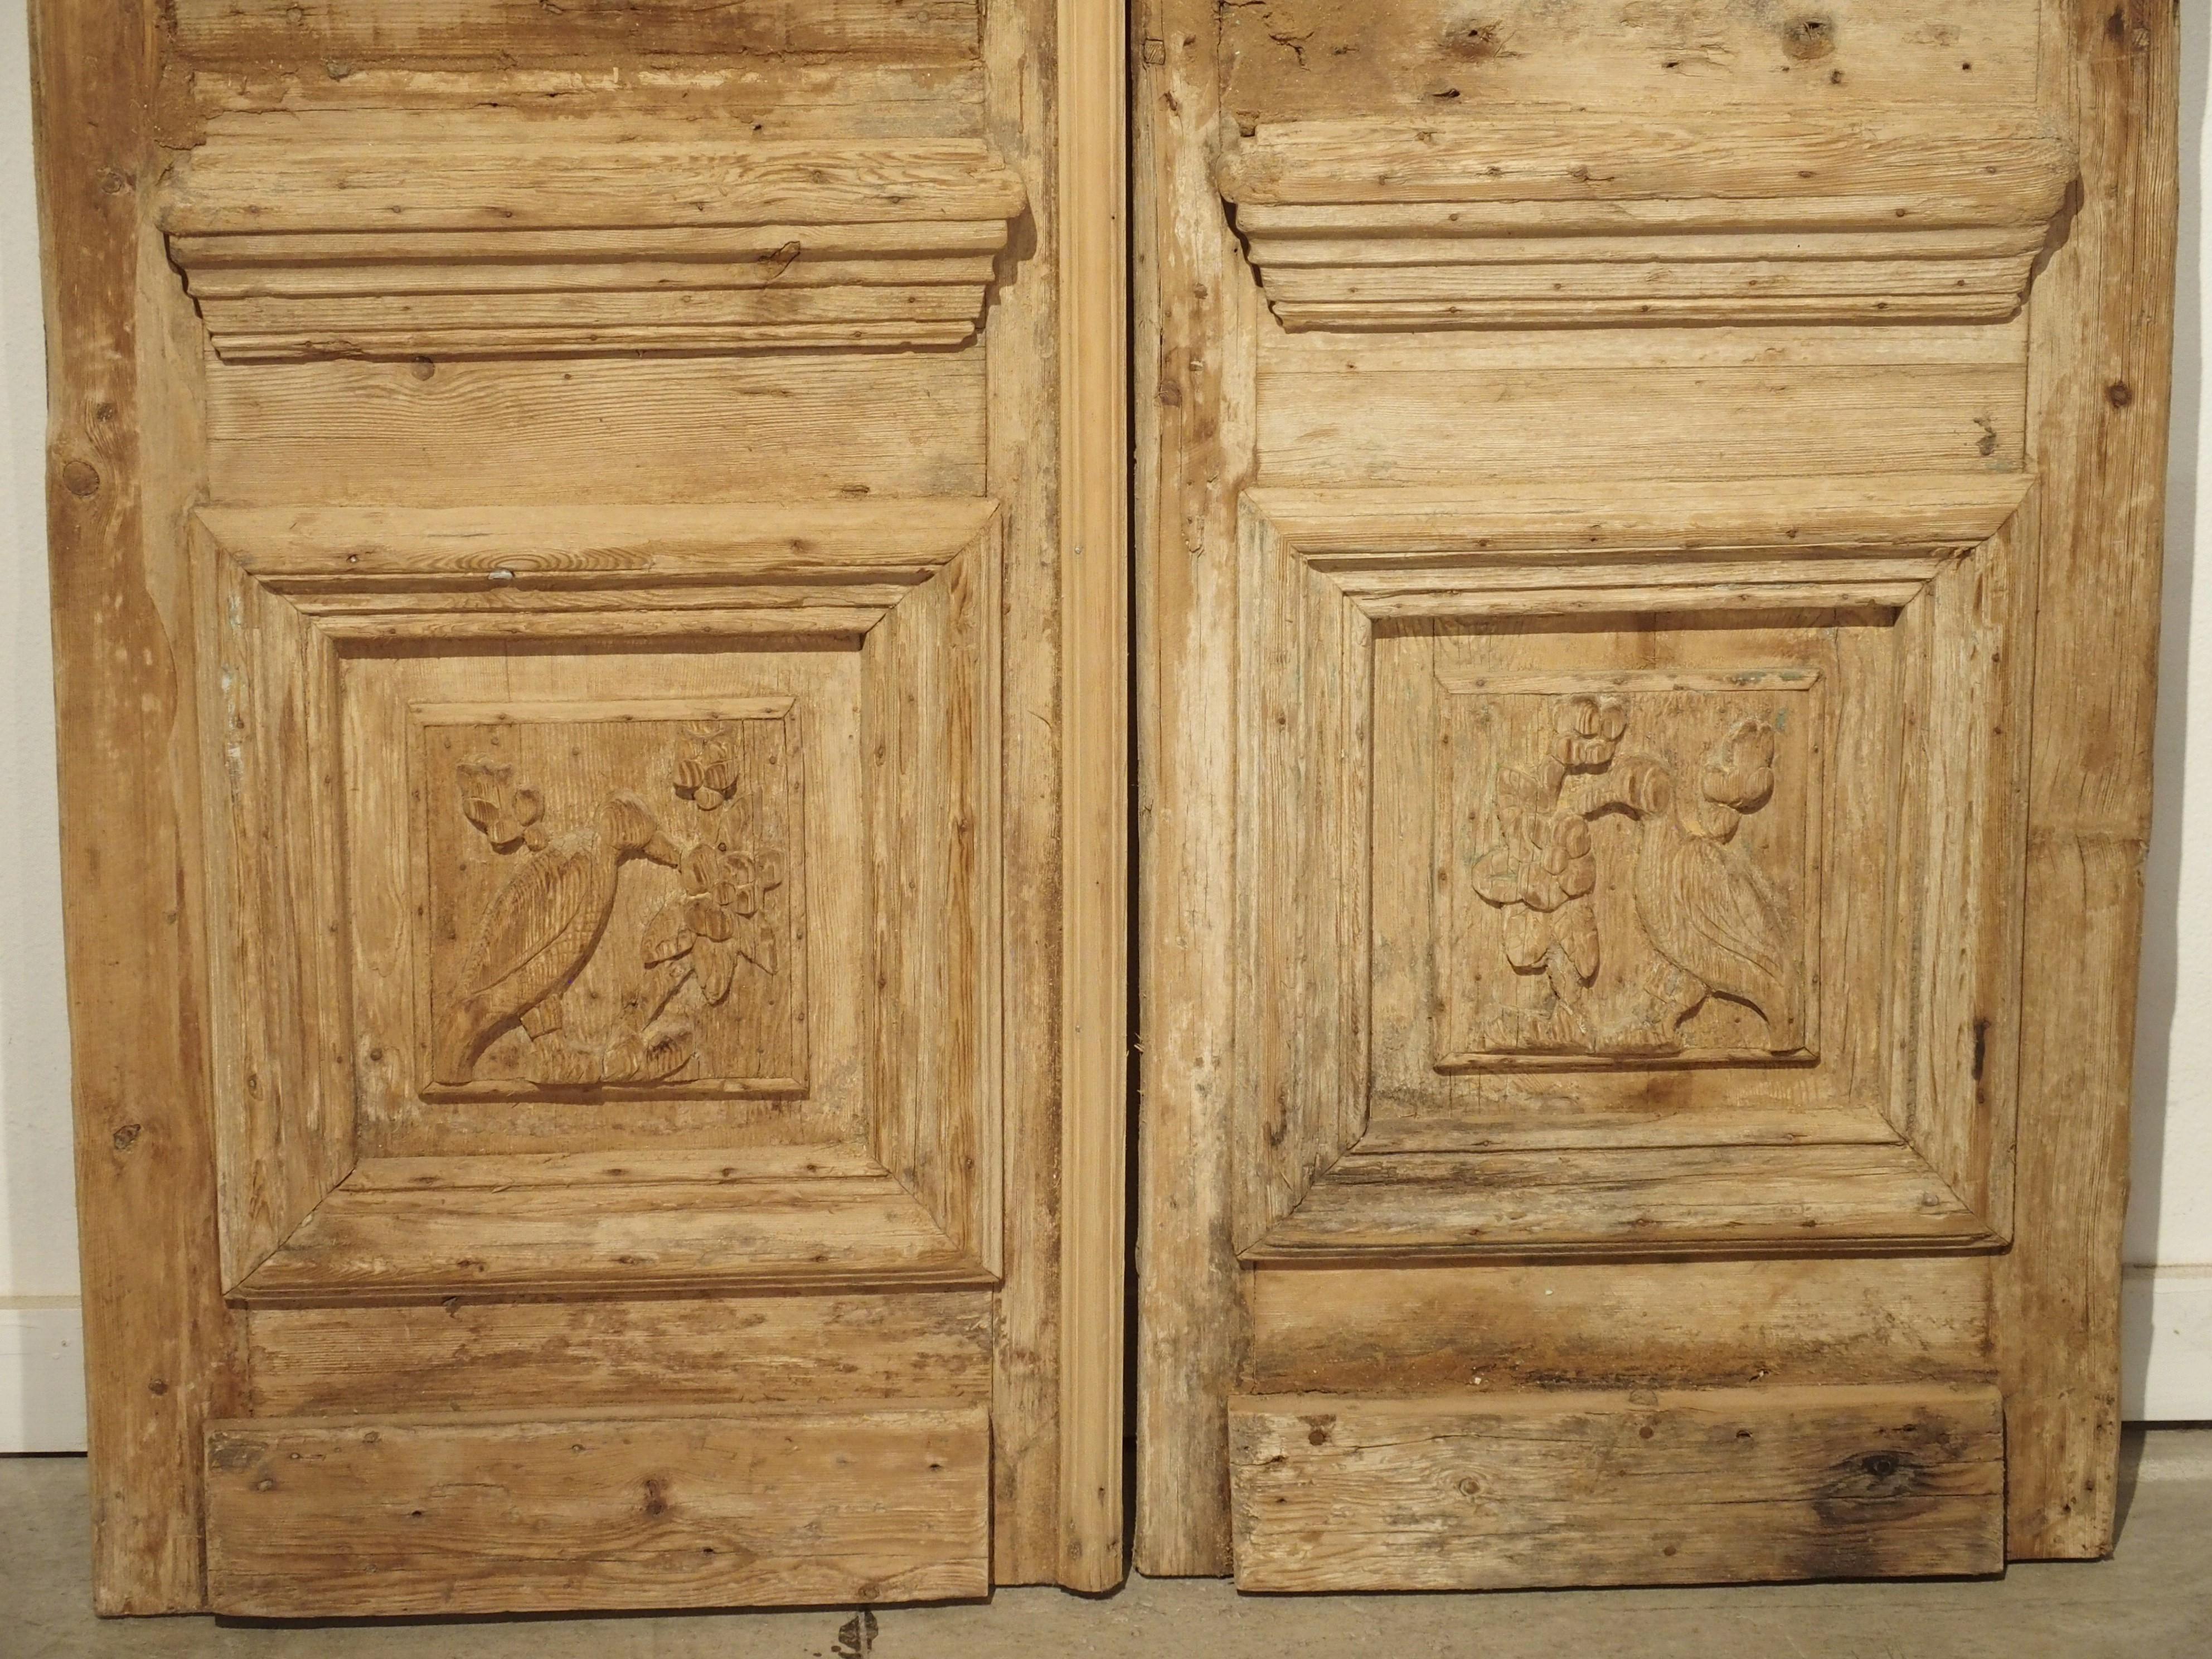 These antique doors are made of carved pine, and were salvaged from a property in Egypt, likely close to Cairo. The lower panels show unique carvings of birds, while the upper sections are more architectural in nature.

In the 19th century, France